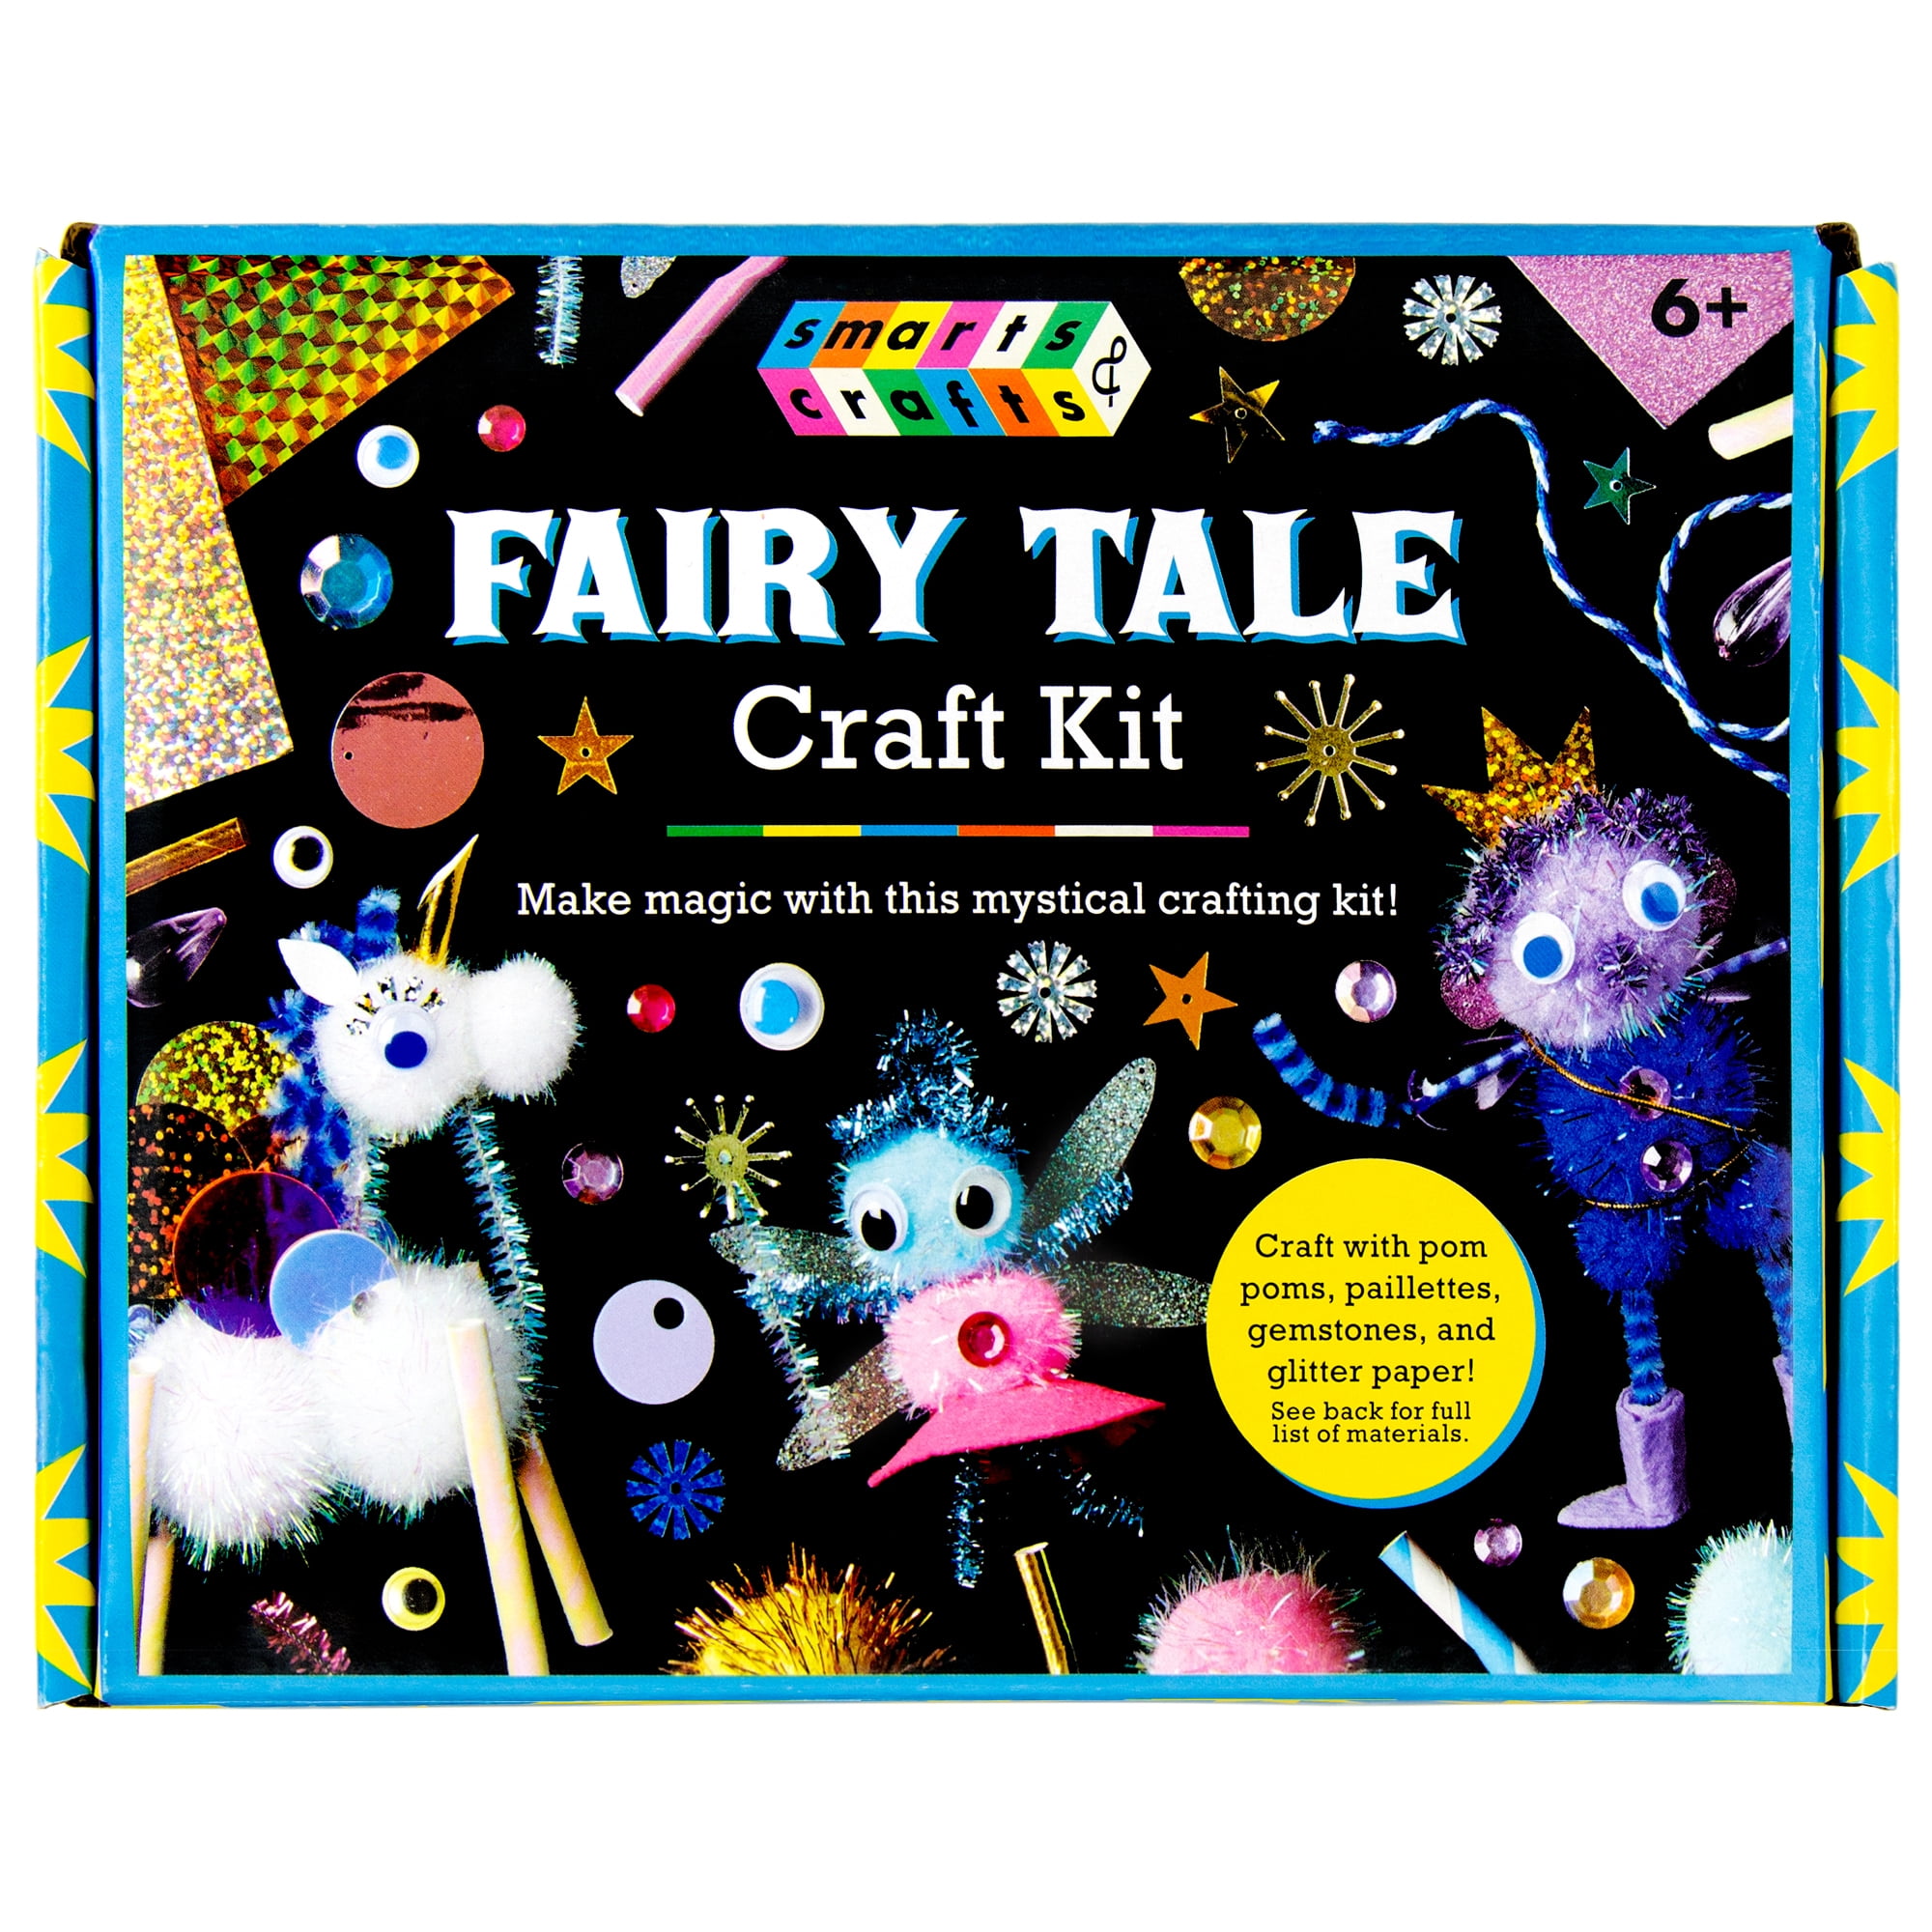 Kid Made Modern - Deluxe Arts and Crafts Supply Collection - 1500+ Piece -  DIY Kids Crafts - Bulk Craft Set - Create Your Own Art - Includes Art